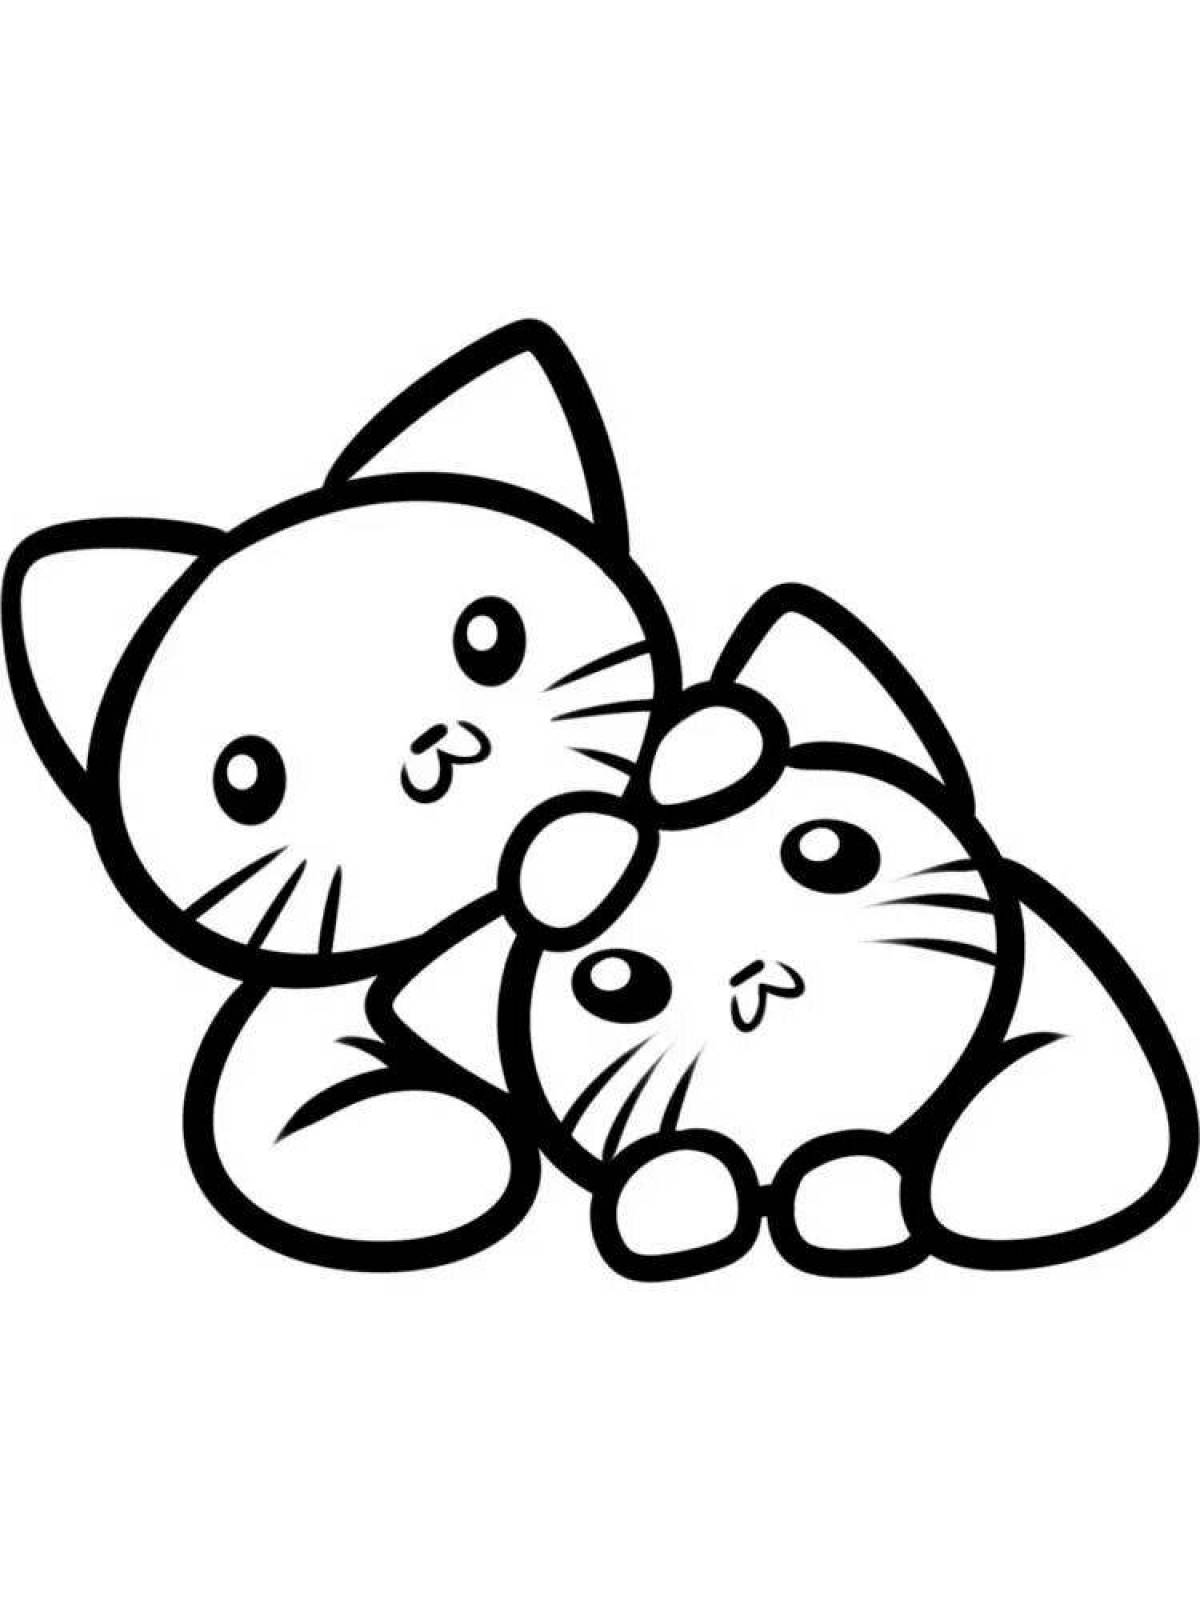 Blessed kittens coloring page